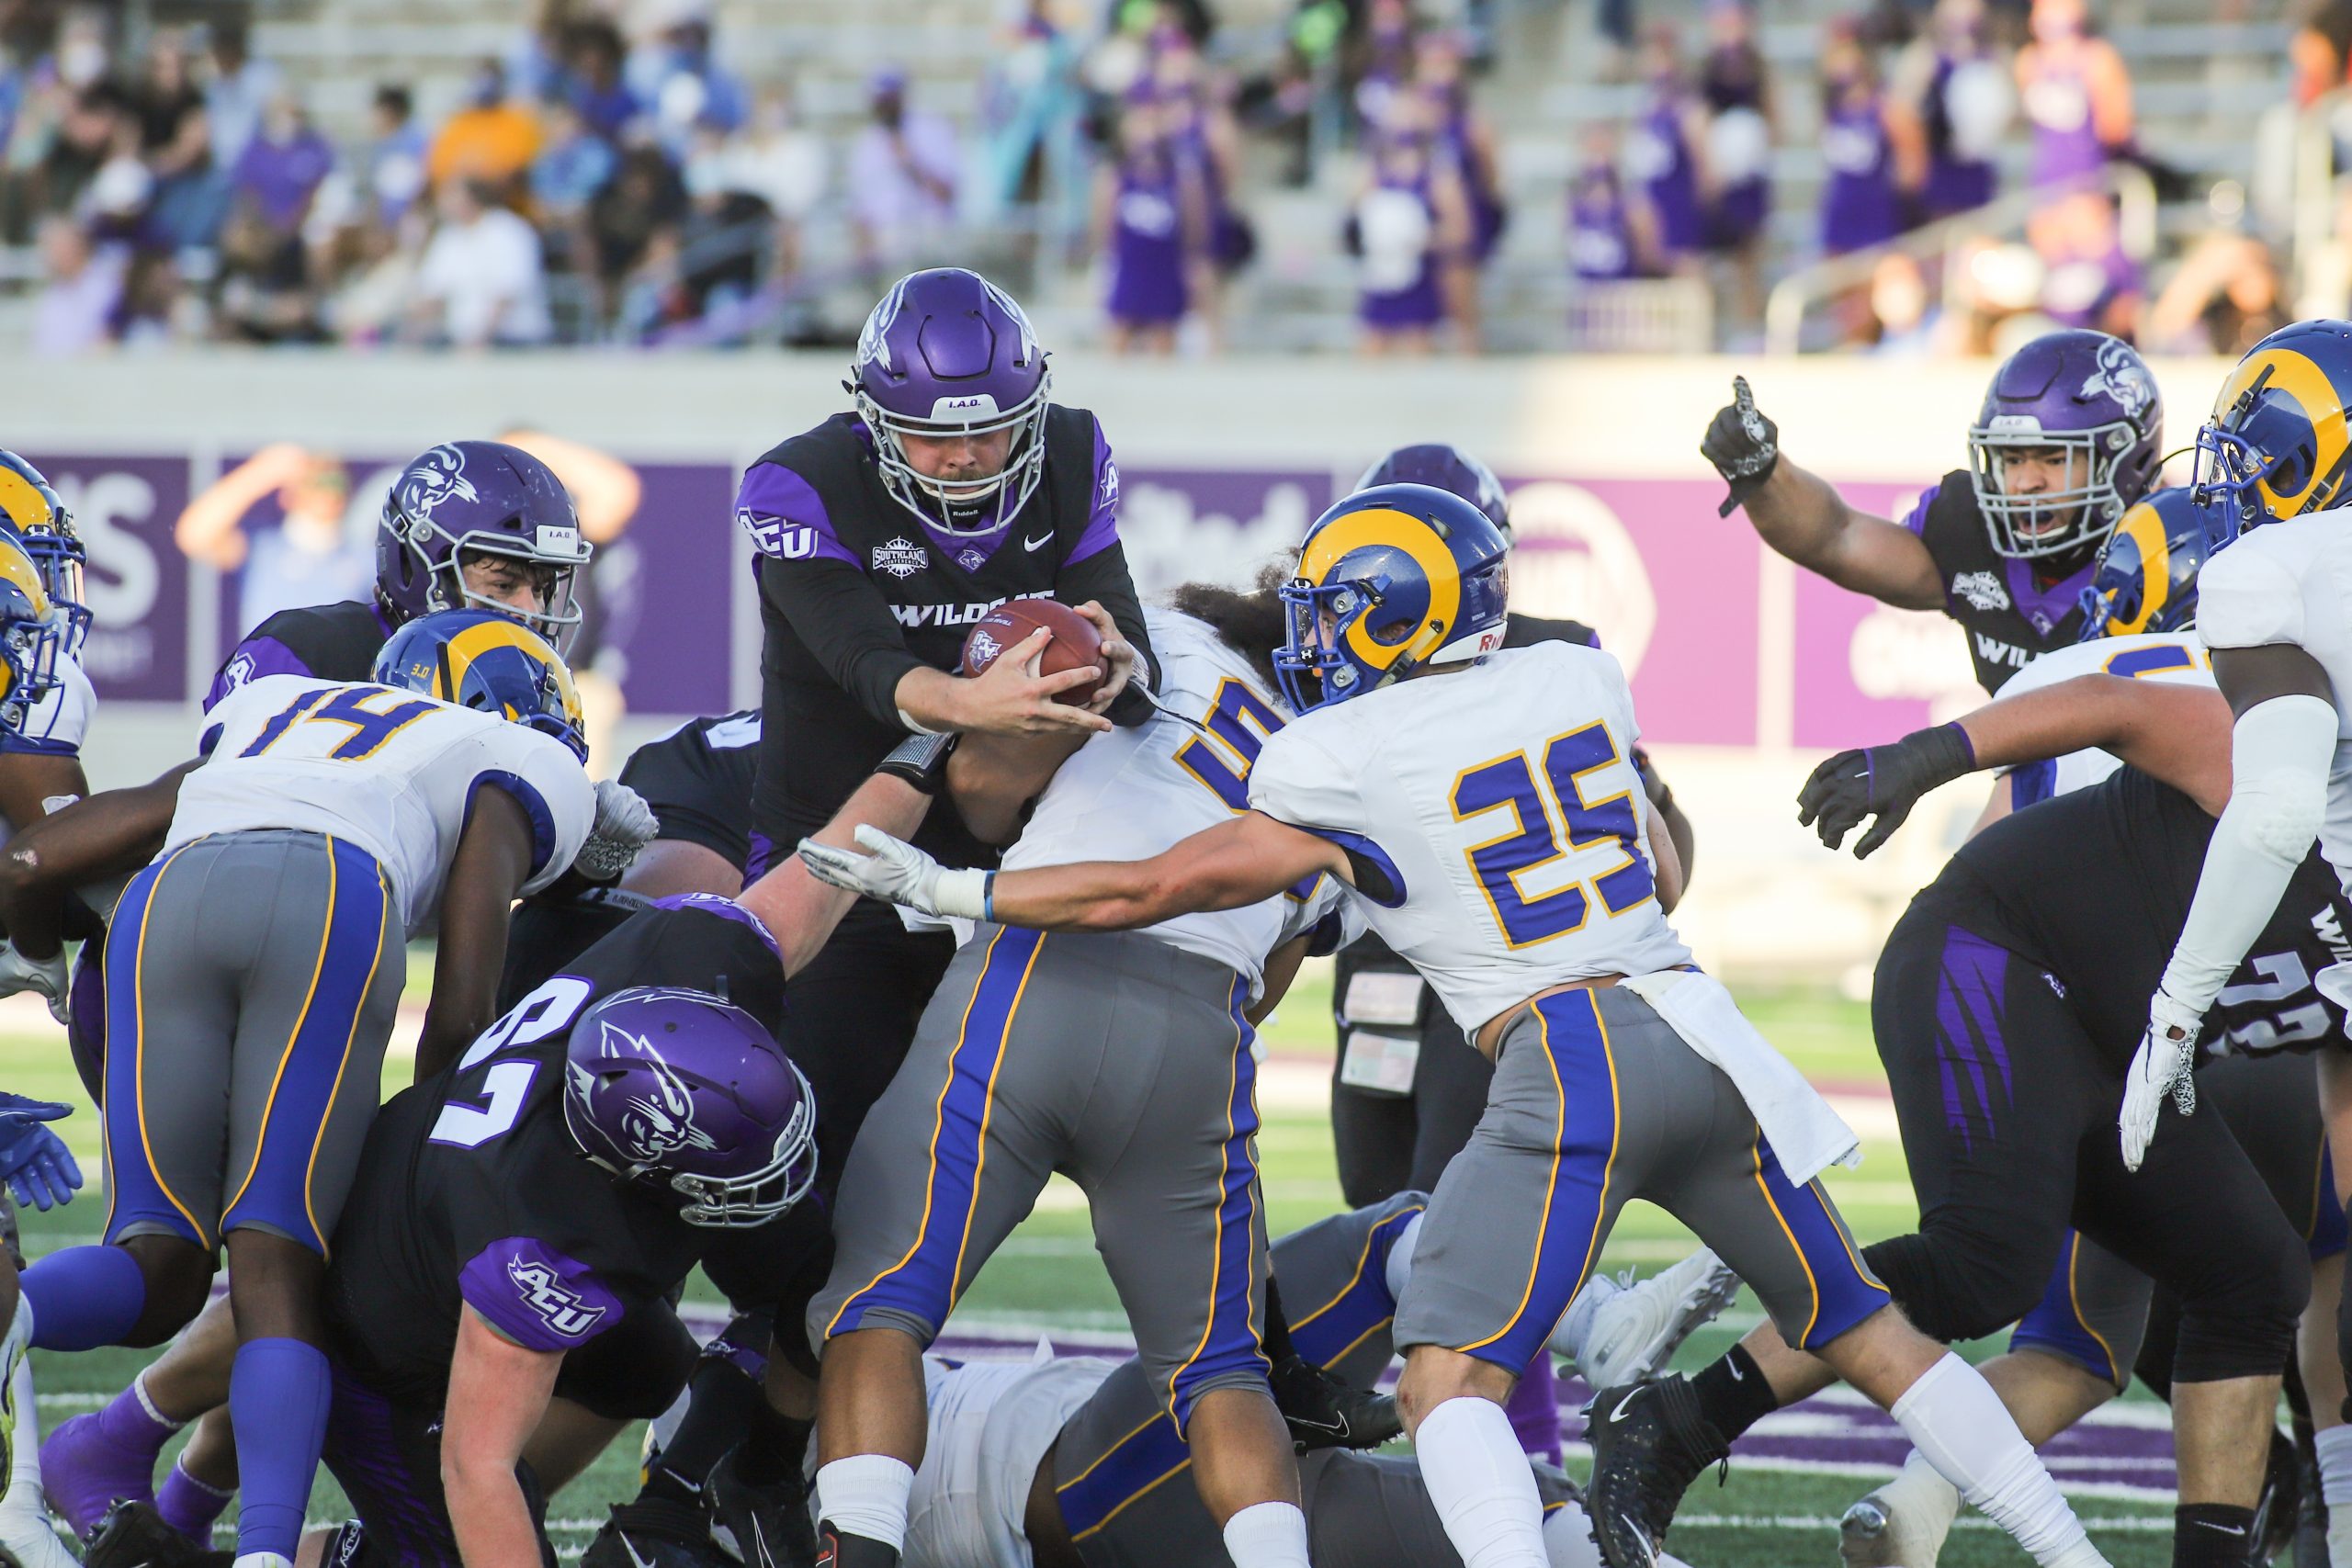 ACU football's future remains uncertain after disappointing season